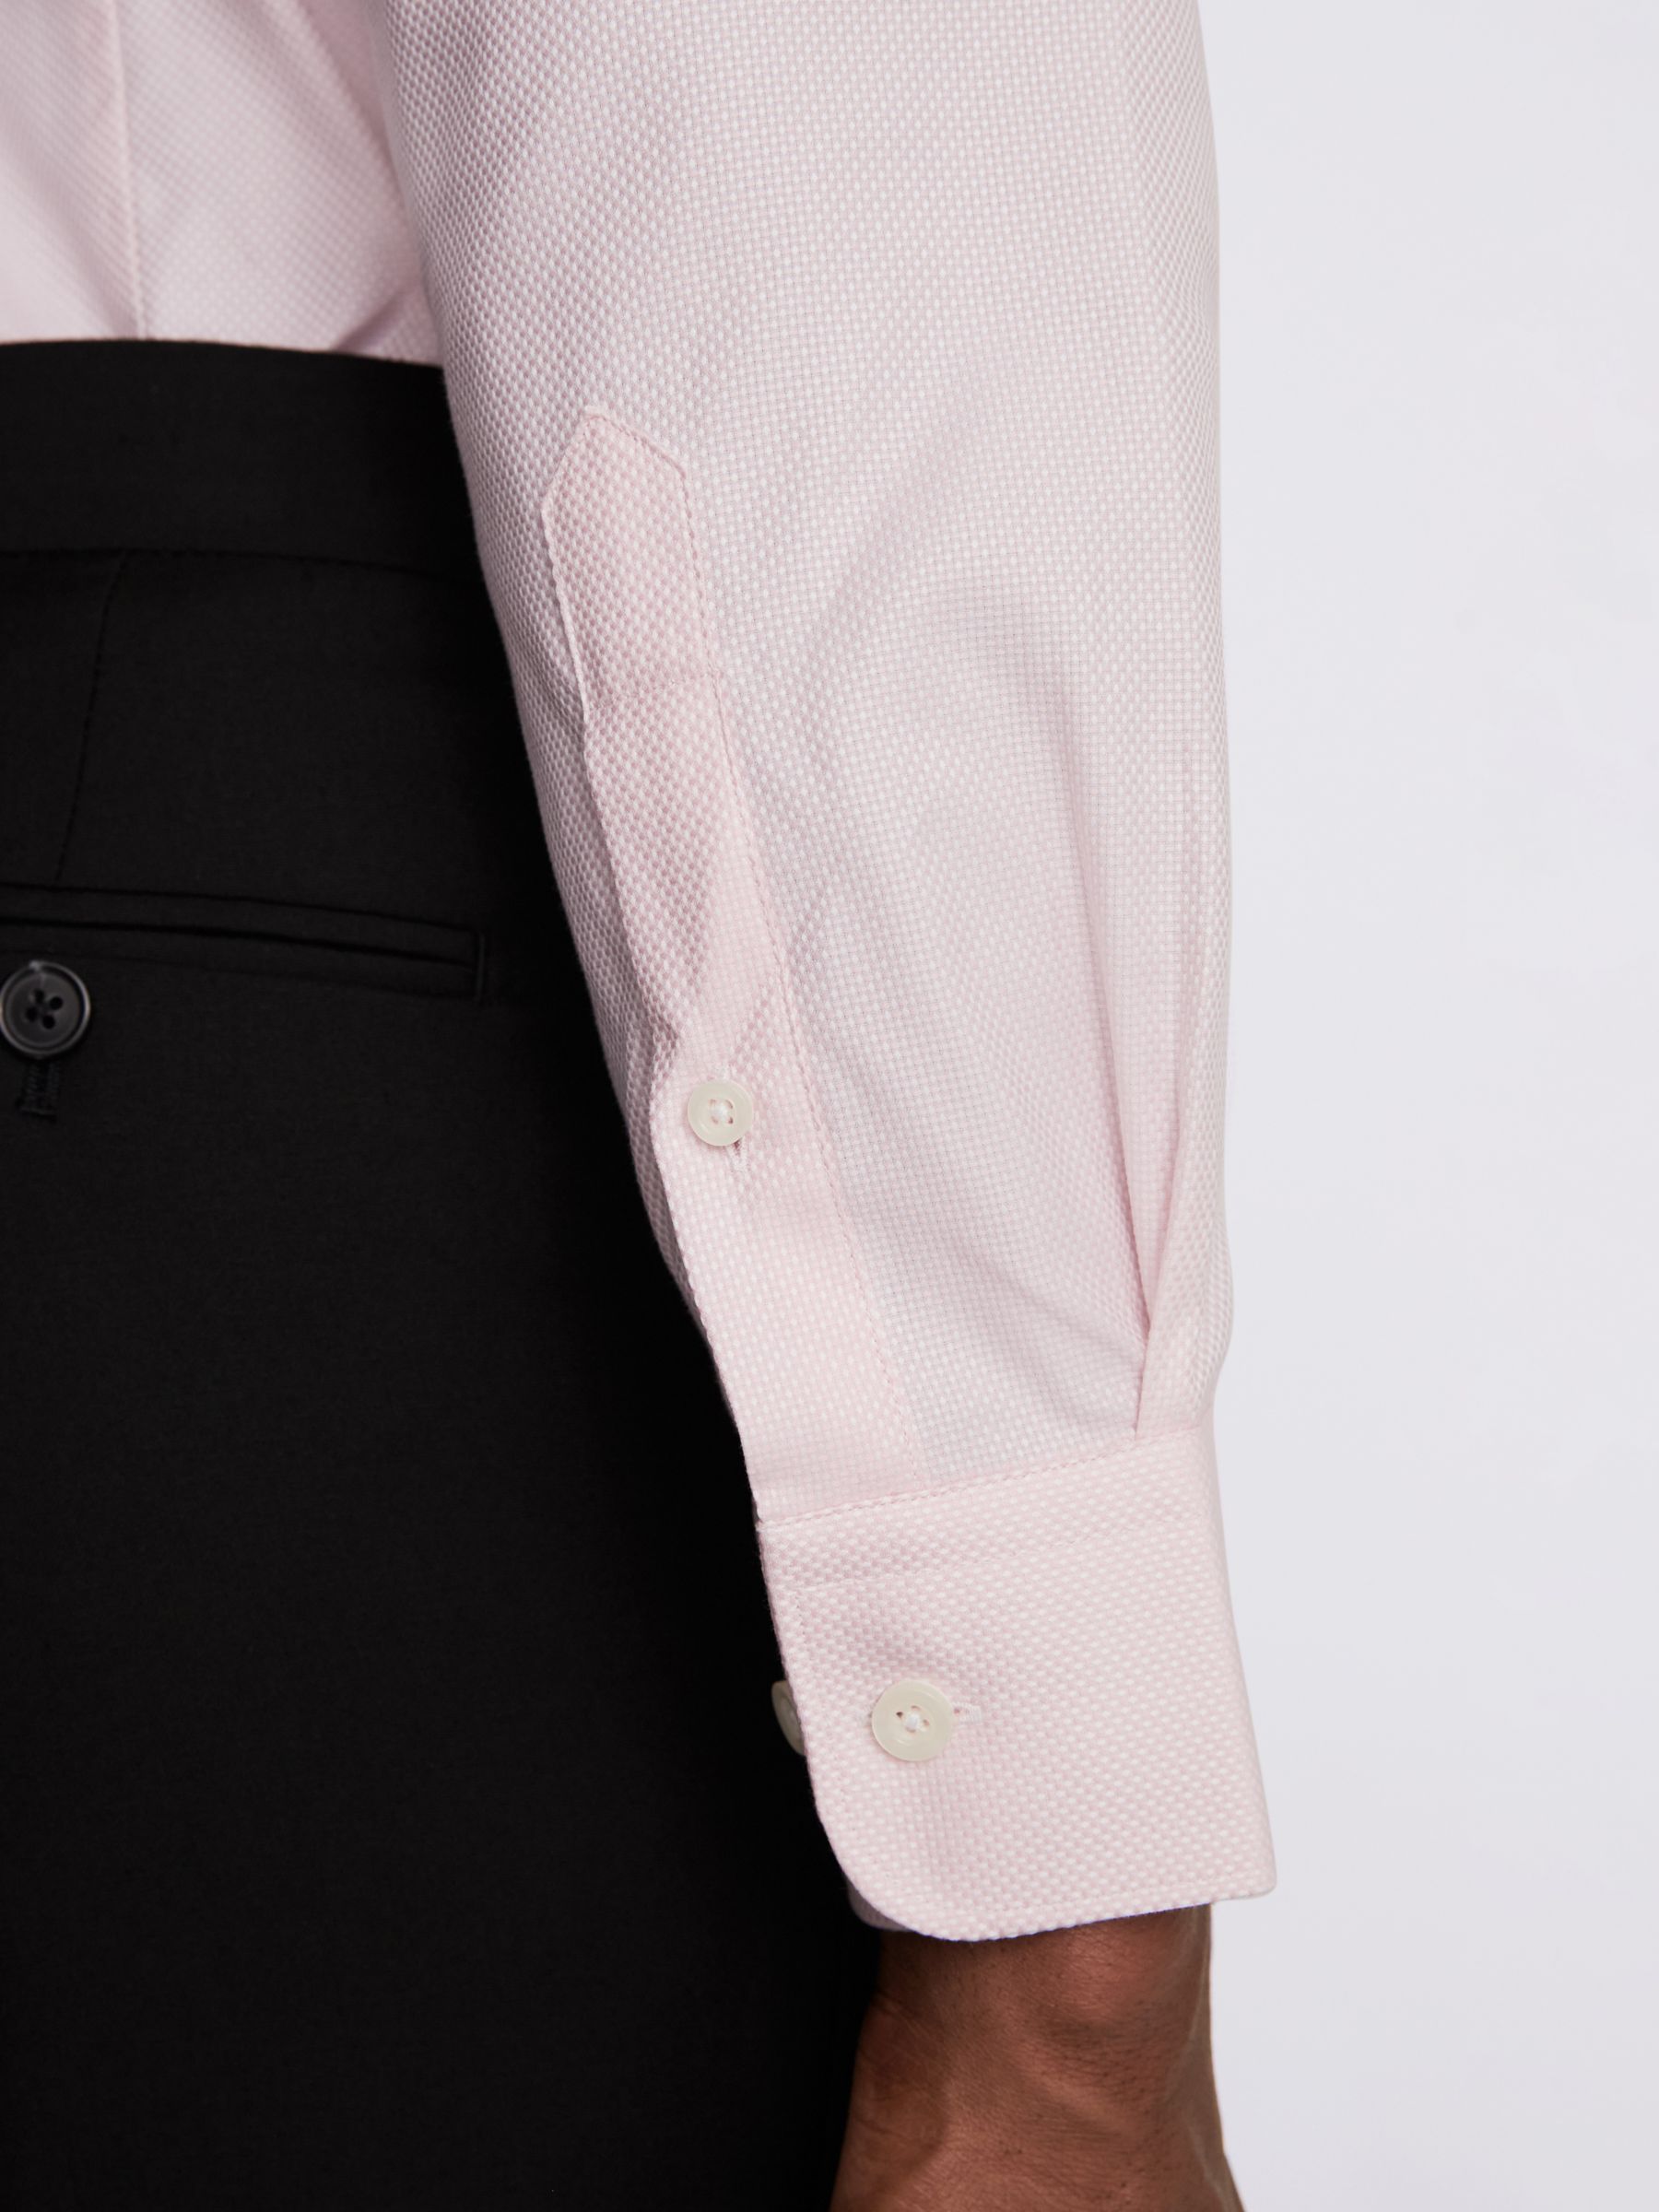 Buy Moss Tailored Single Cuff Cotton Dobby Shirt Online at johnlewis.com